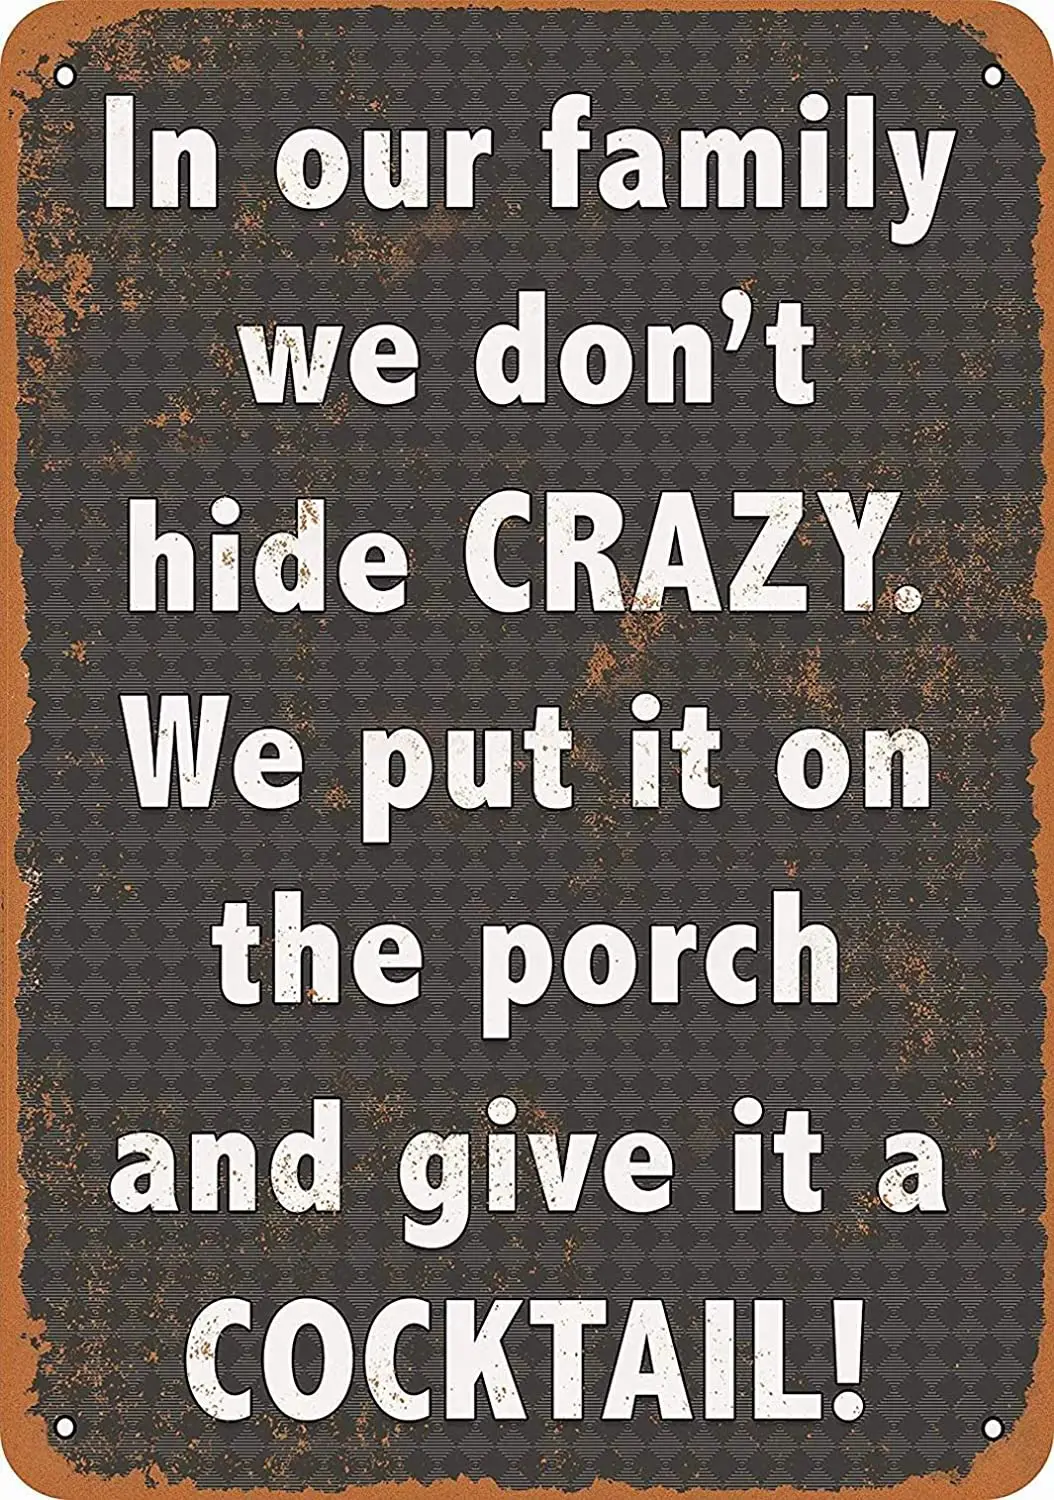 

Metal Sign We Don't Hide Crazy. We Put It on The Porch Give It A Cocktail Retro Wall Decor Home Decor 8" X 12" Inch Vintage